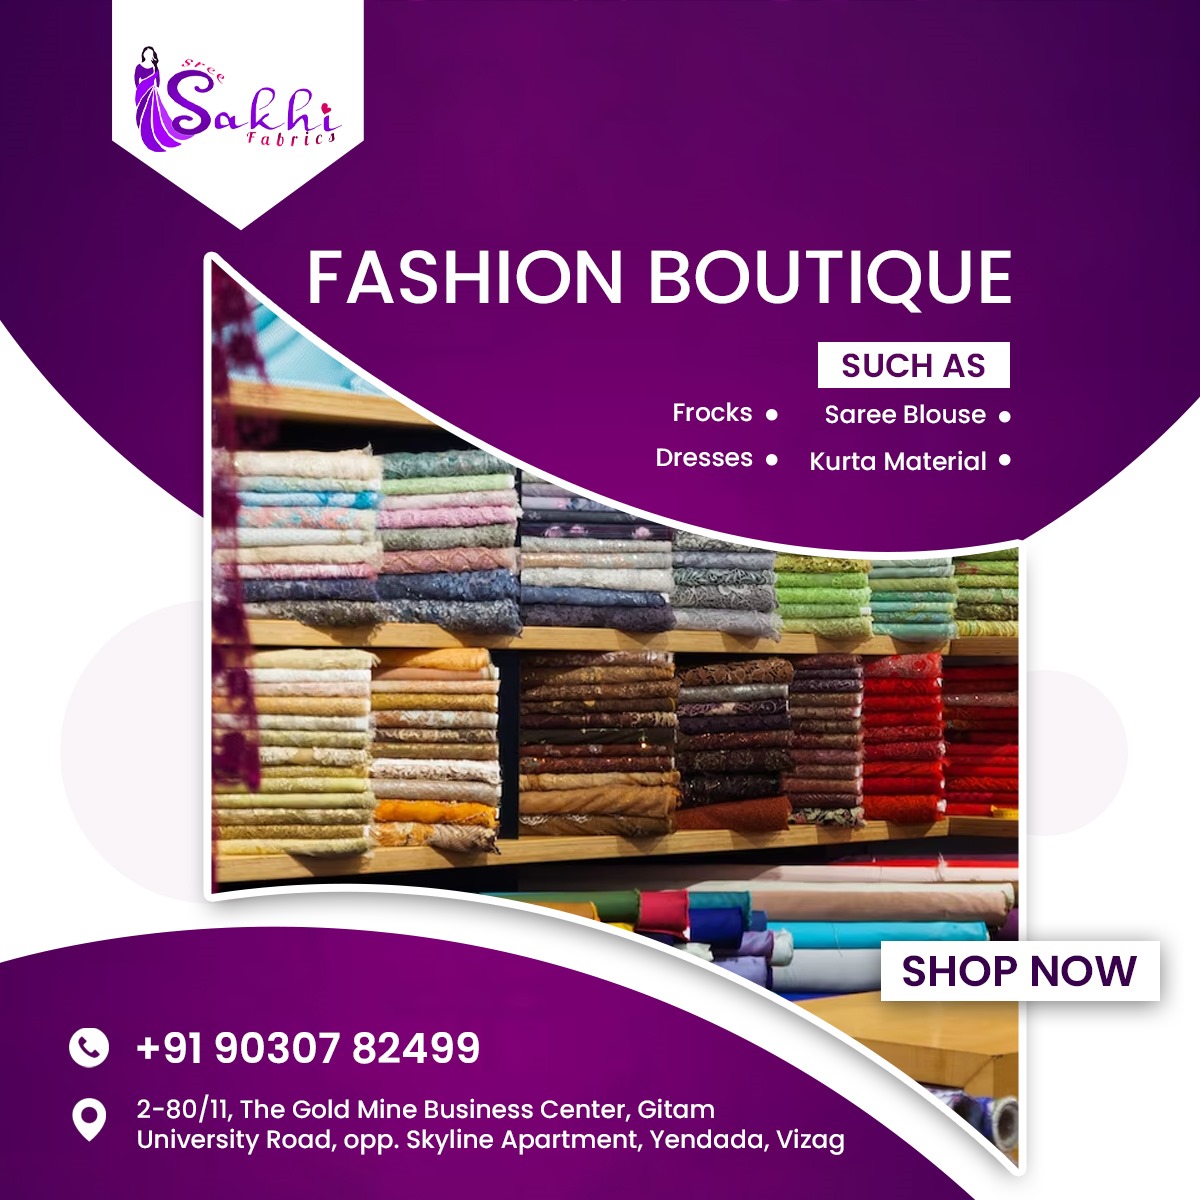 Explore our curated collection of luxurious fabrics, perfect blend of quality, design, and comfort. Make every occasion special with Sree Sakhi Fabrics. 

📞 Contact us :9030782499

#SreeSakhiFabrics #FashionBoutique #LuxuryFabrics #DesignerWear #CustomDesigns #TrendyOutfits